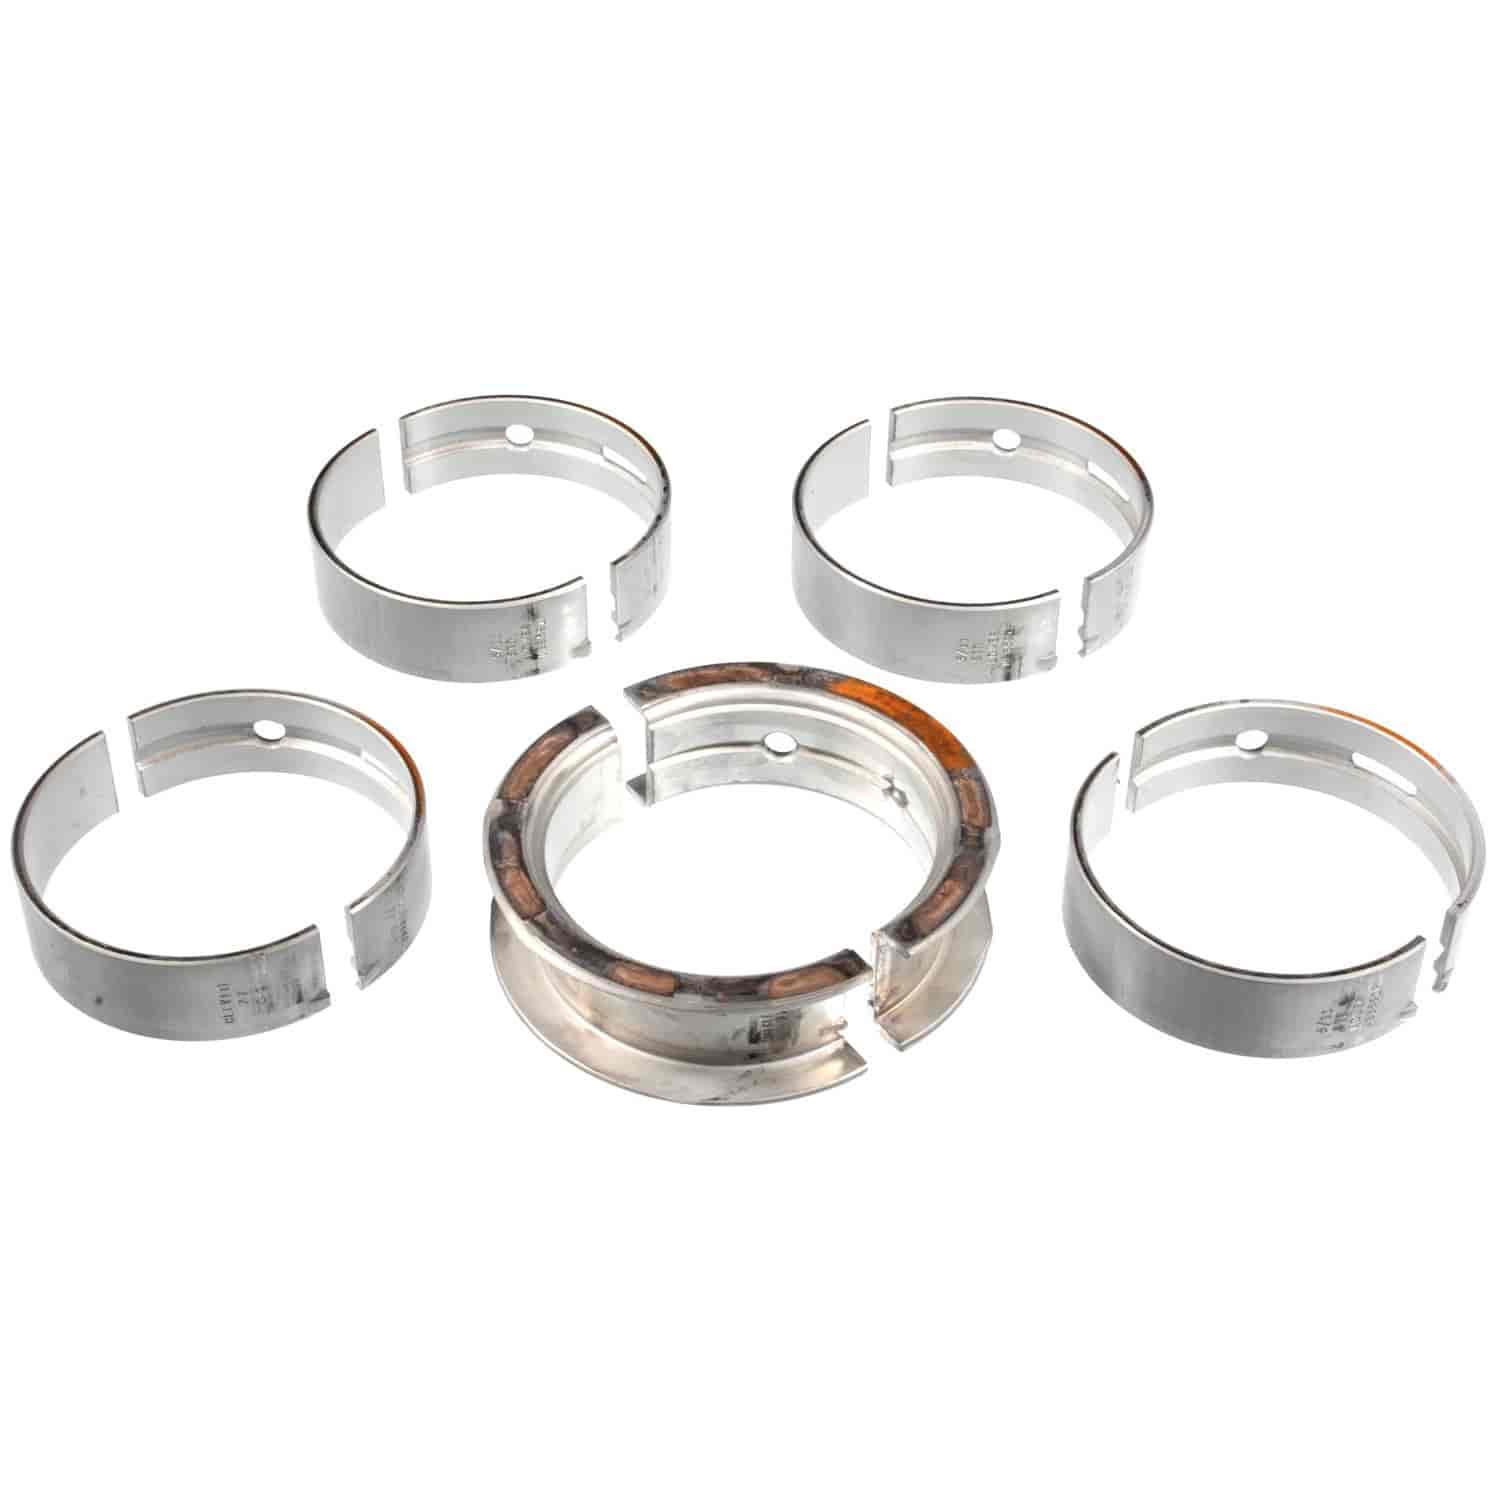 Main Bearing Set GM/Chevy 2006-2015 LS V8 6.2L Supercharged & 7.0L (LSA/LS7/LS9) with Standard Size